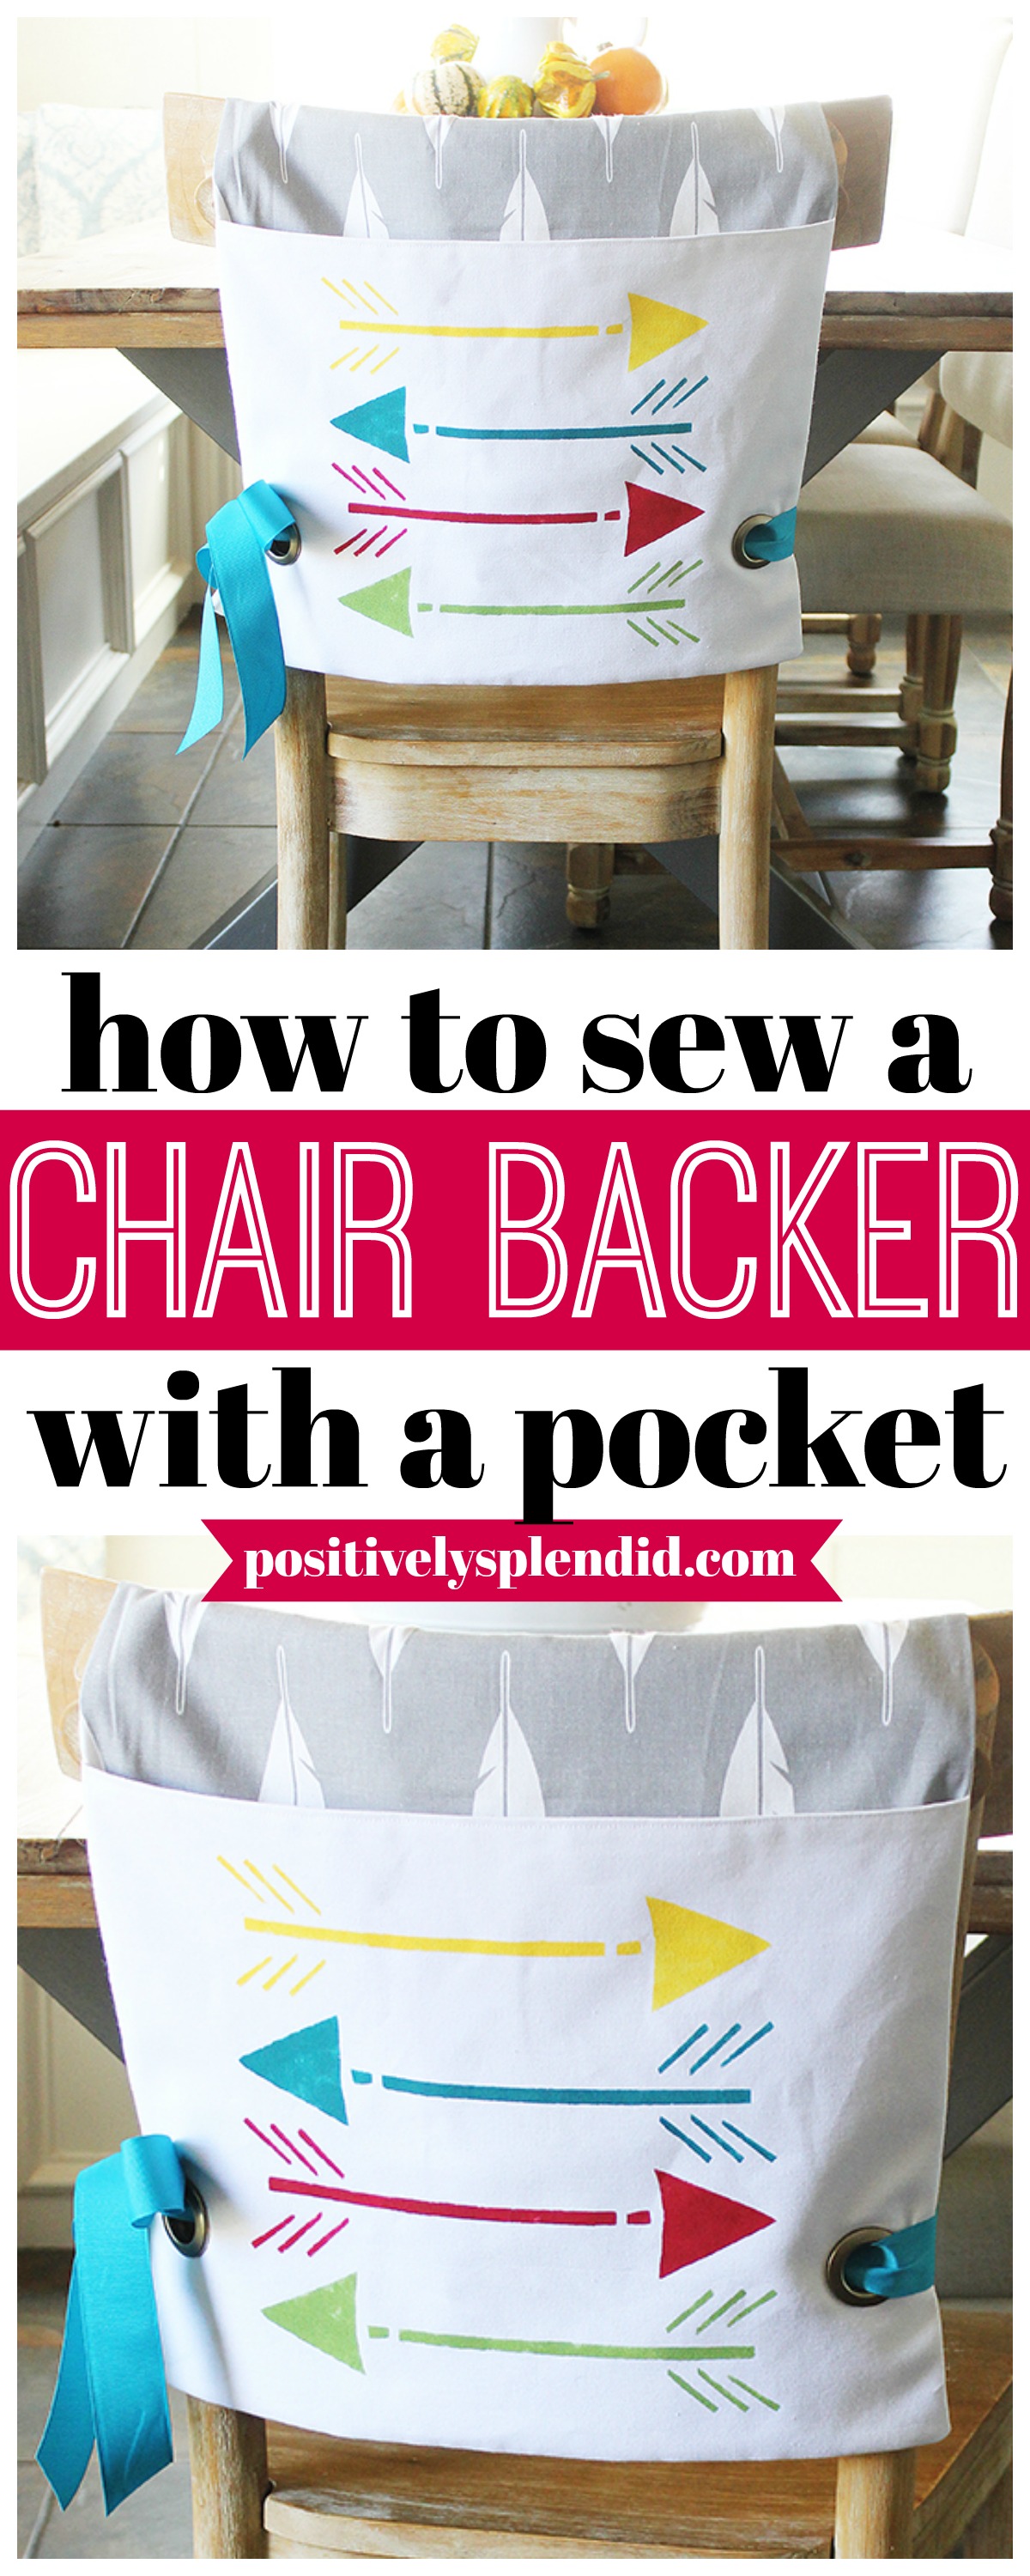 How to Sew a Chair Backer with a Pocket